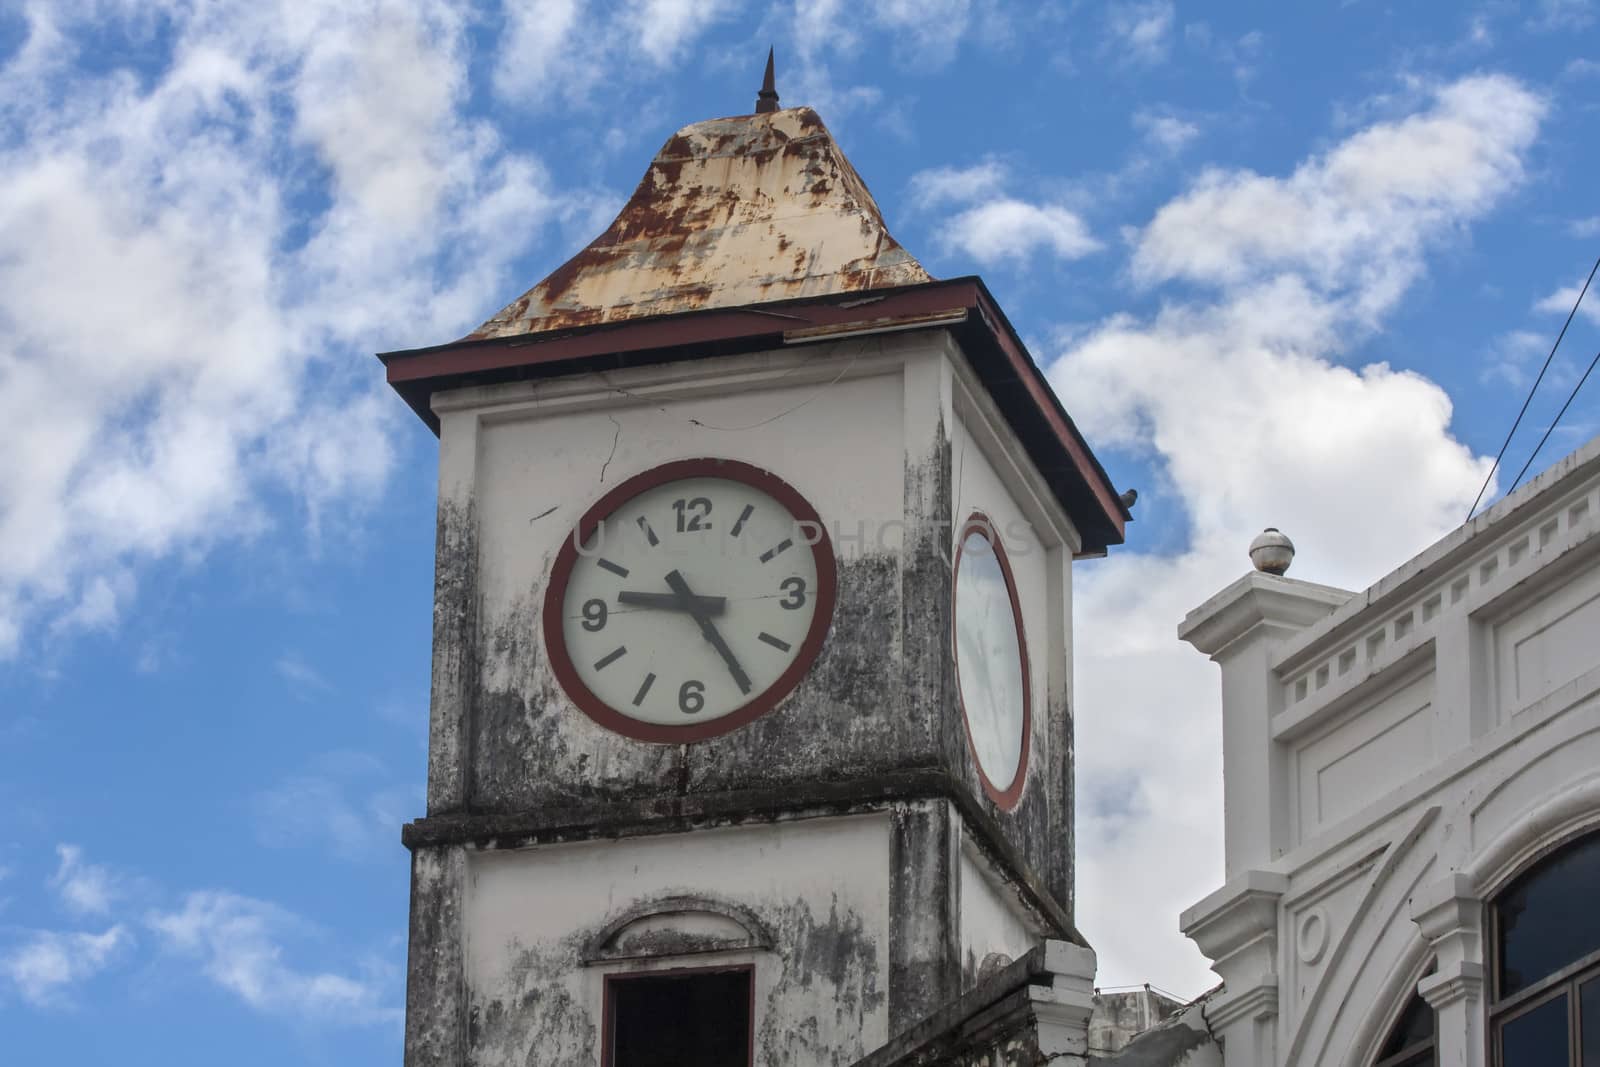 The old police station clock tower in Phuket town (horizontal)